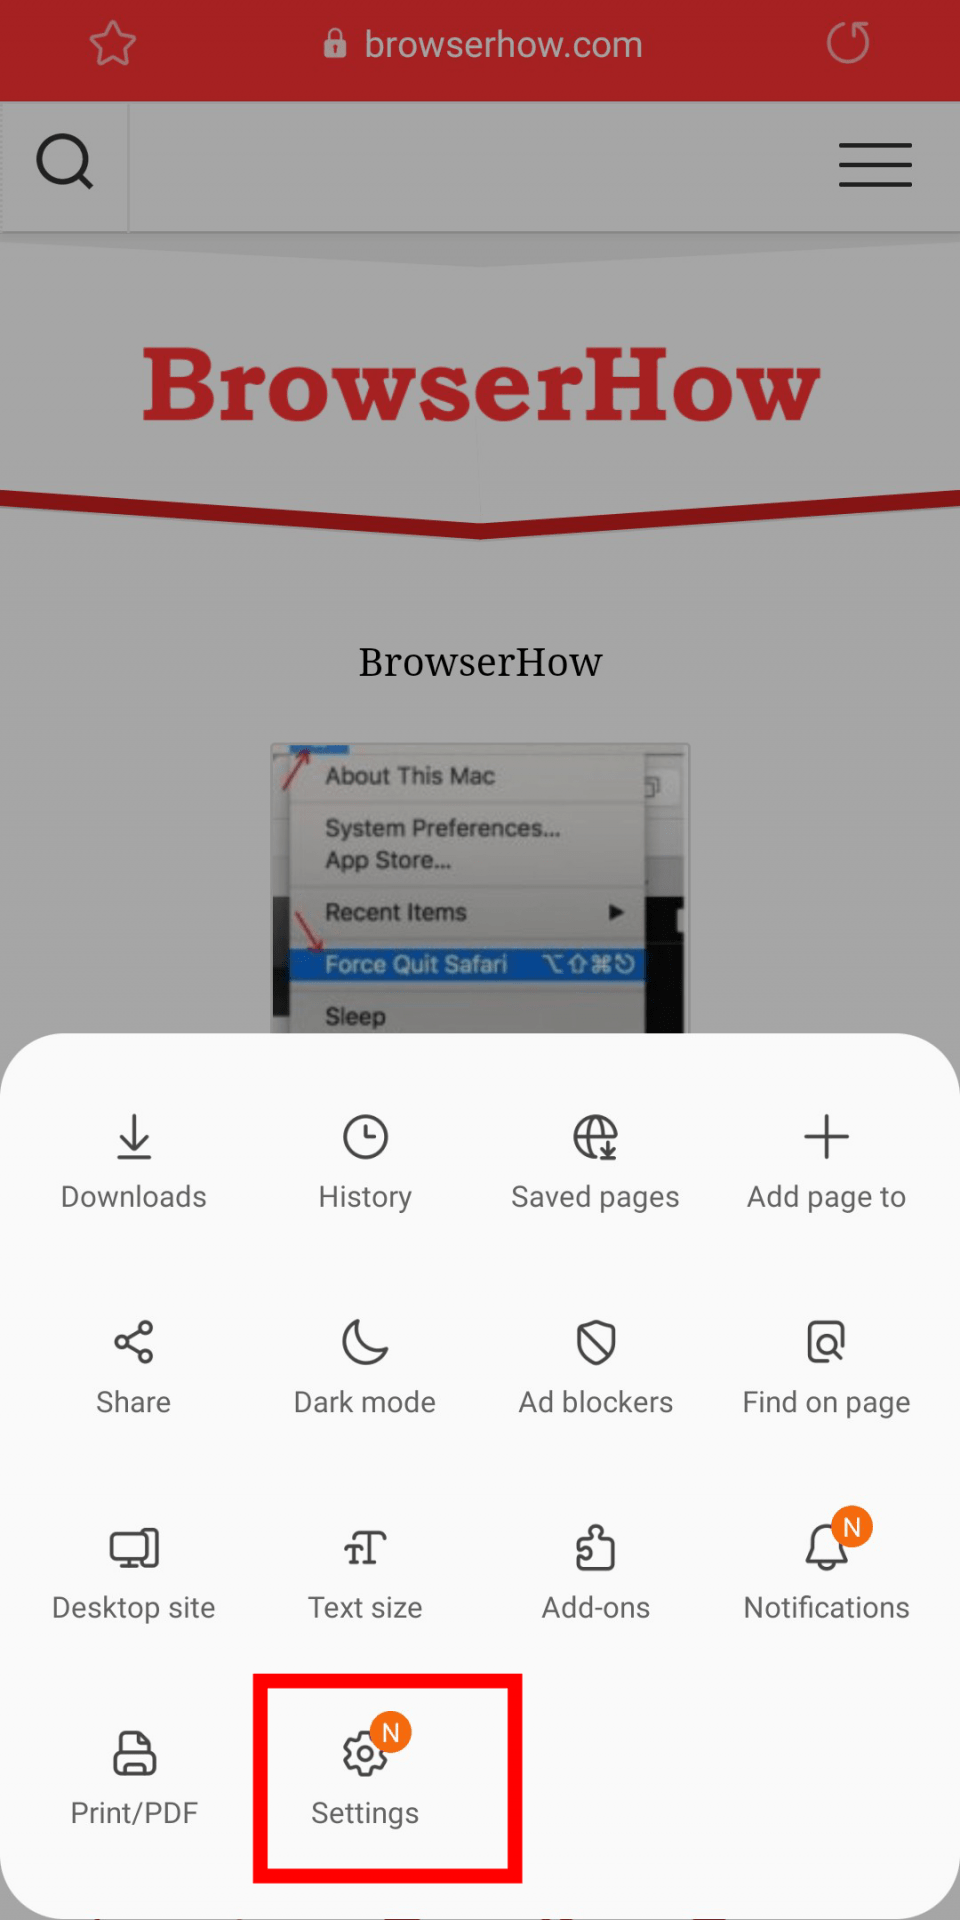 How to Hard Refresh and Reload a Web Page in Samsung Internet?